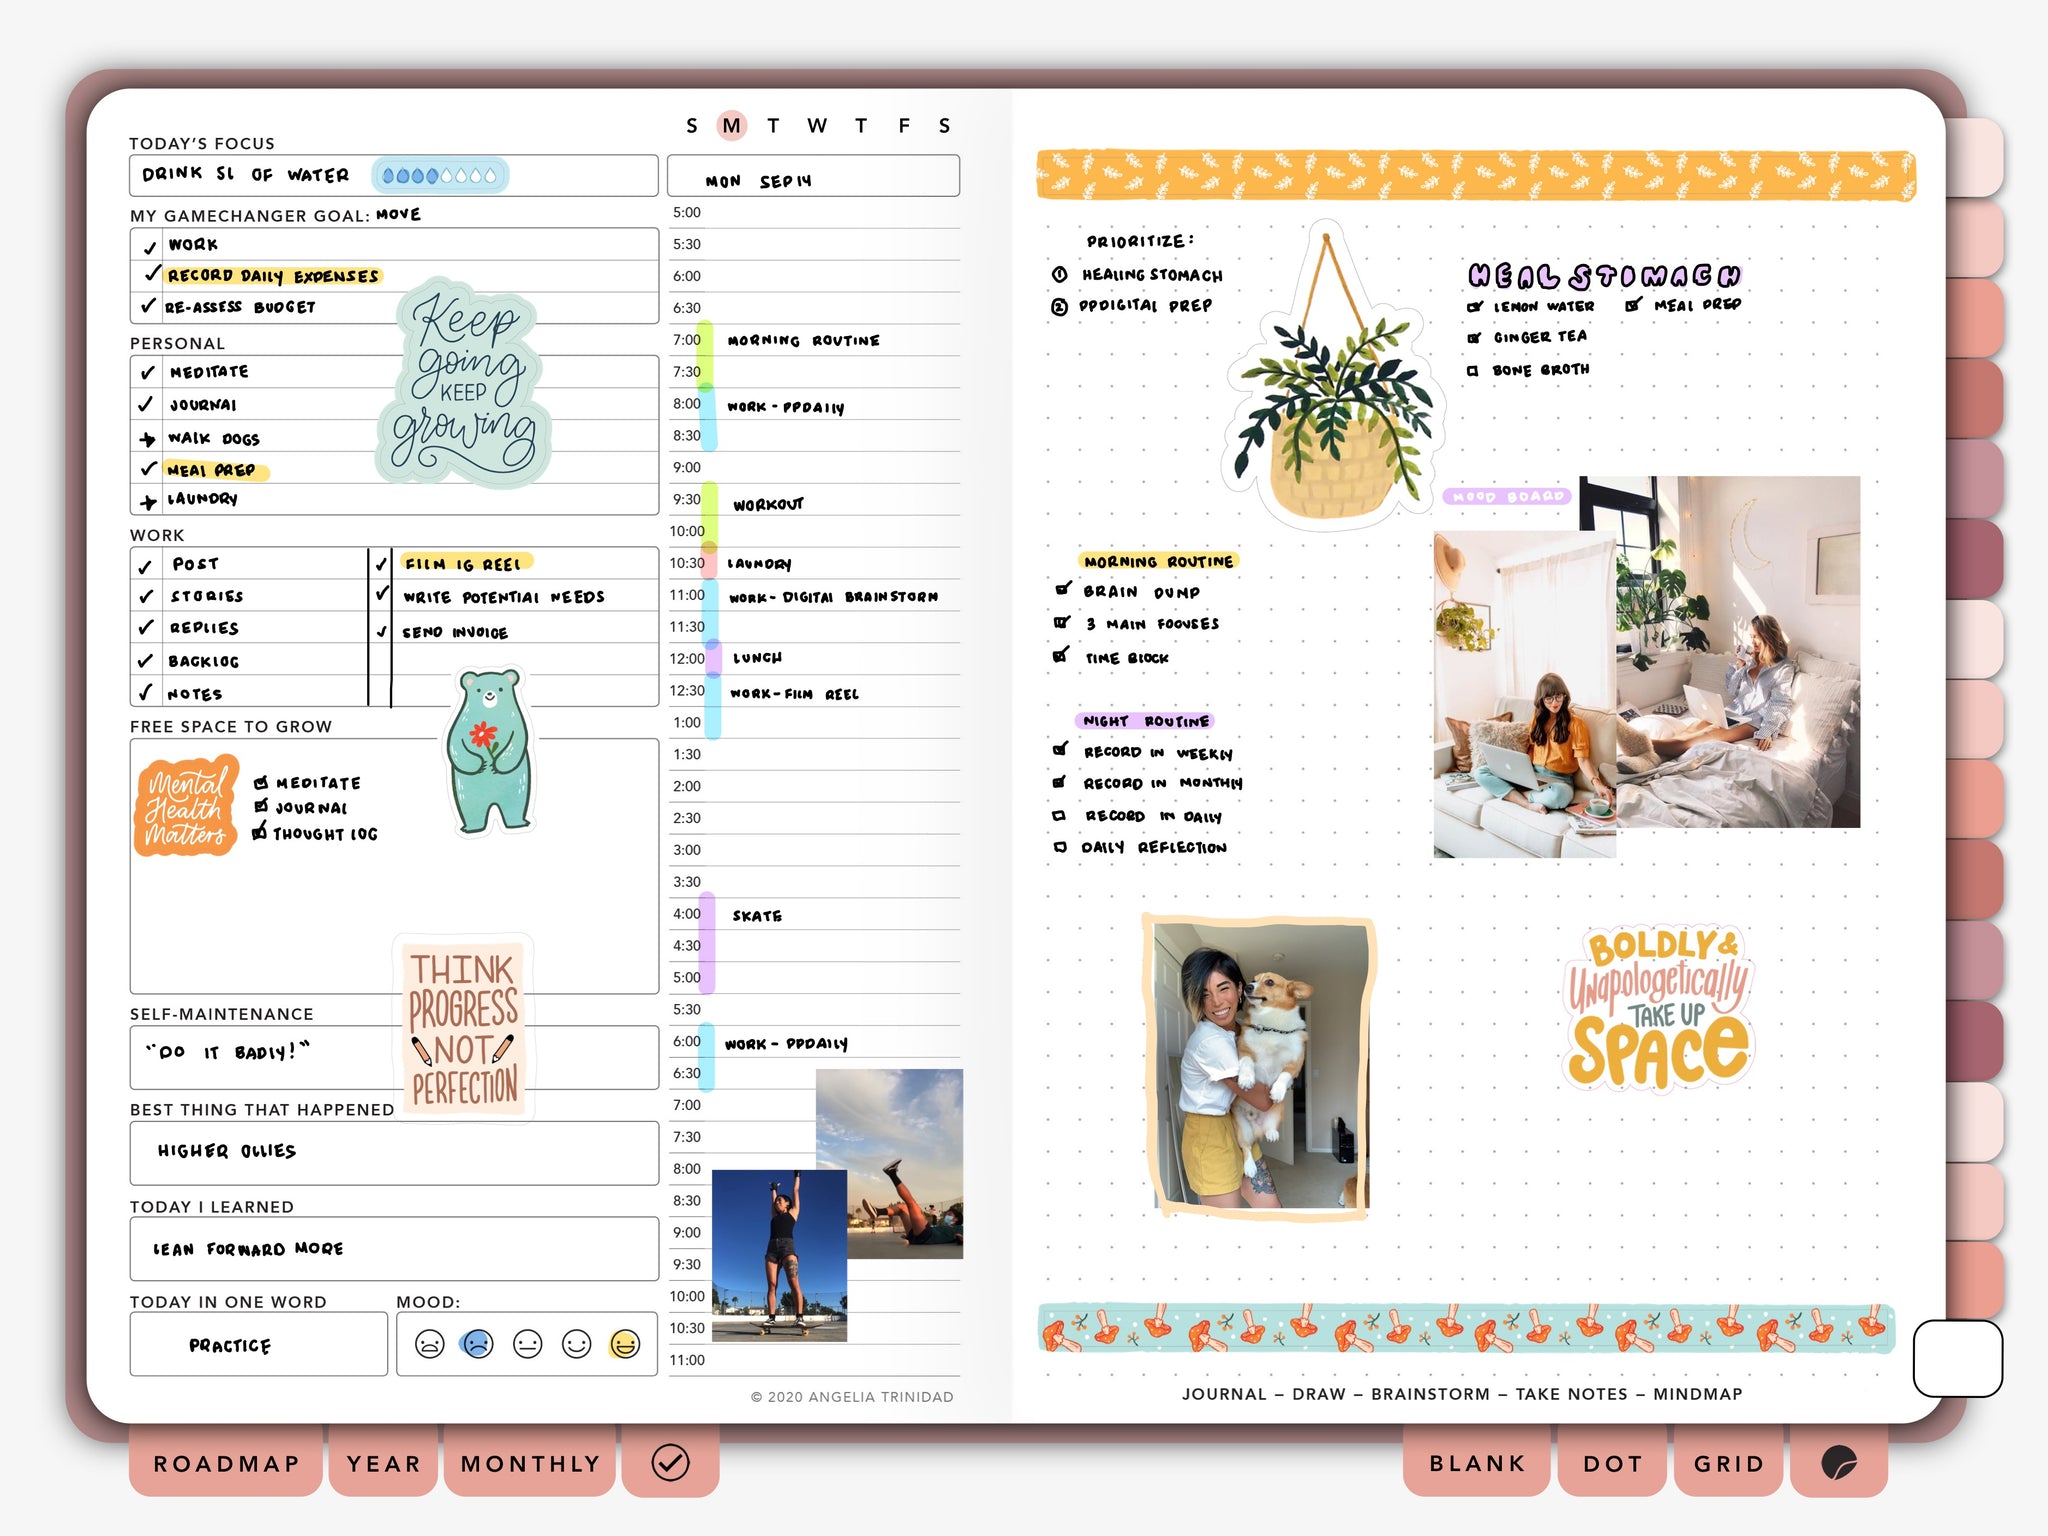 Passion Planner Daily Digital Spread with Images in Space of Infinite Possibility